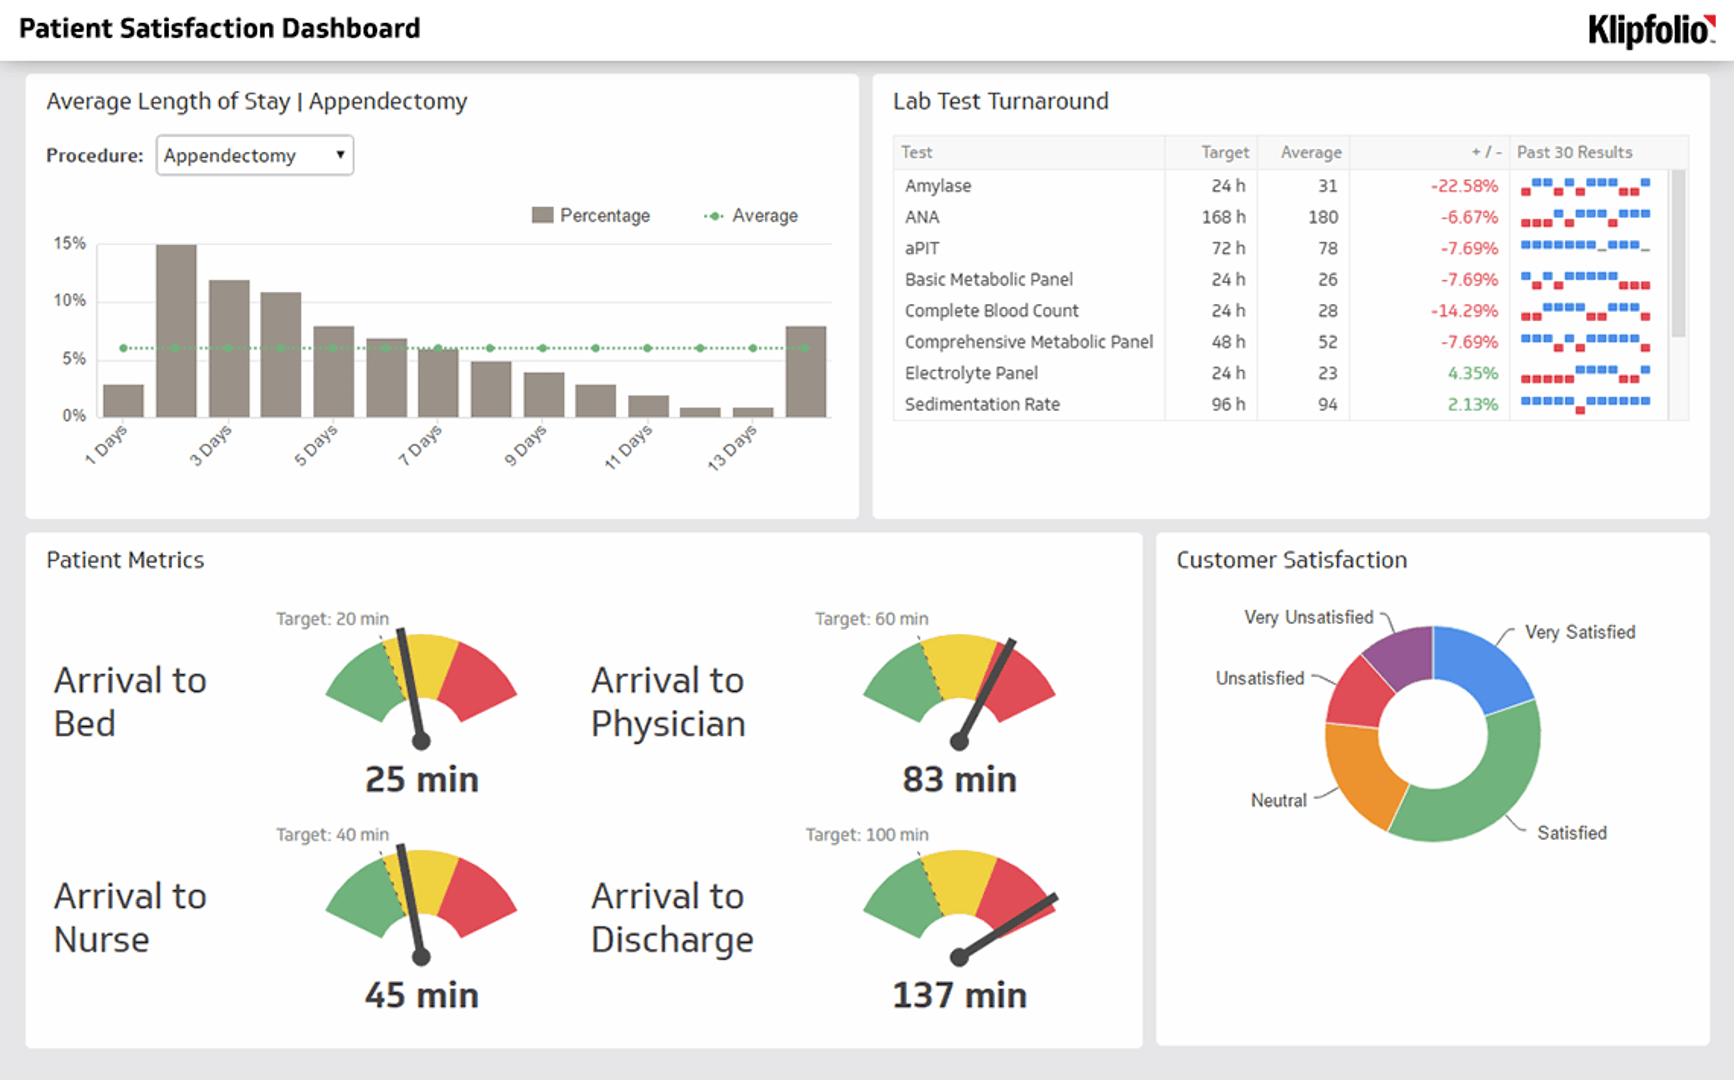 Related Dashboard Examples - Patient Satisfaction Dashboard